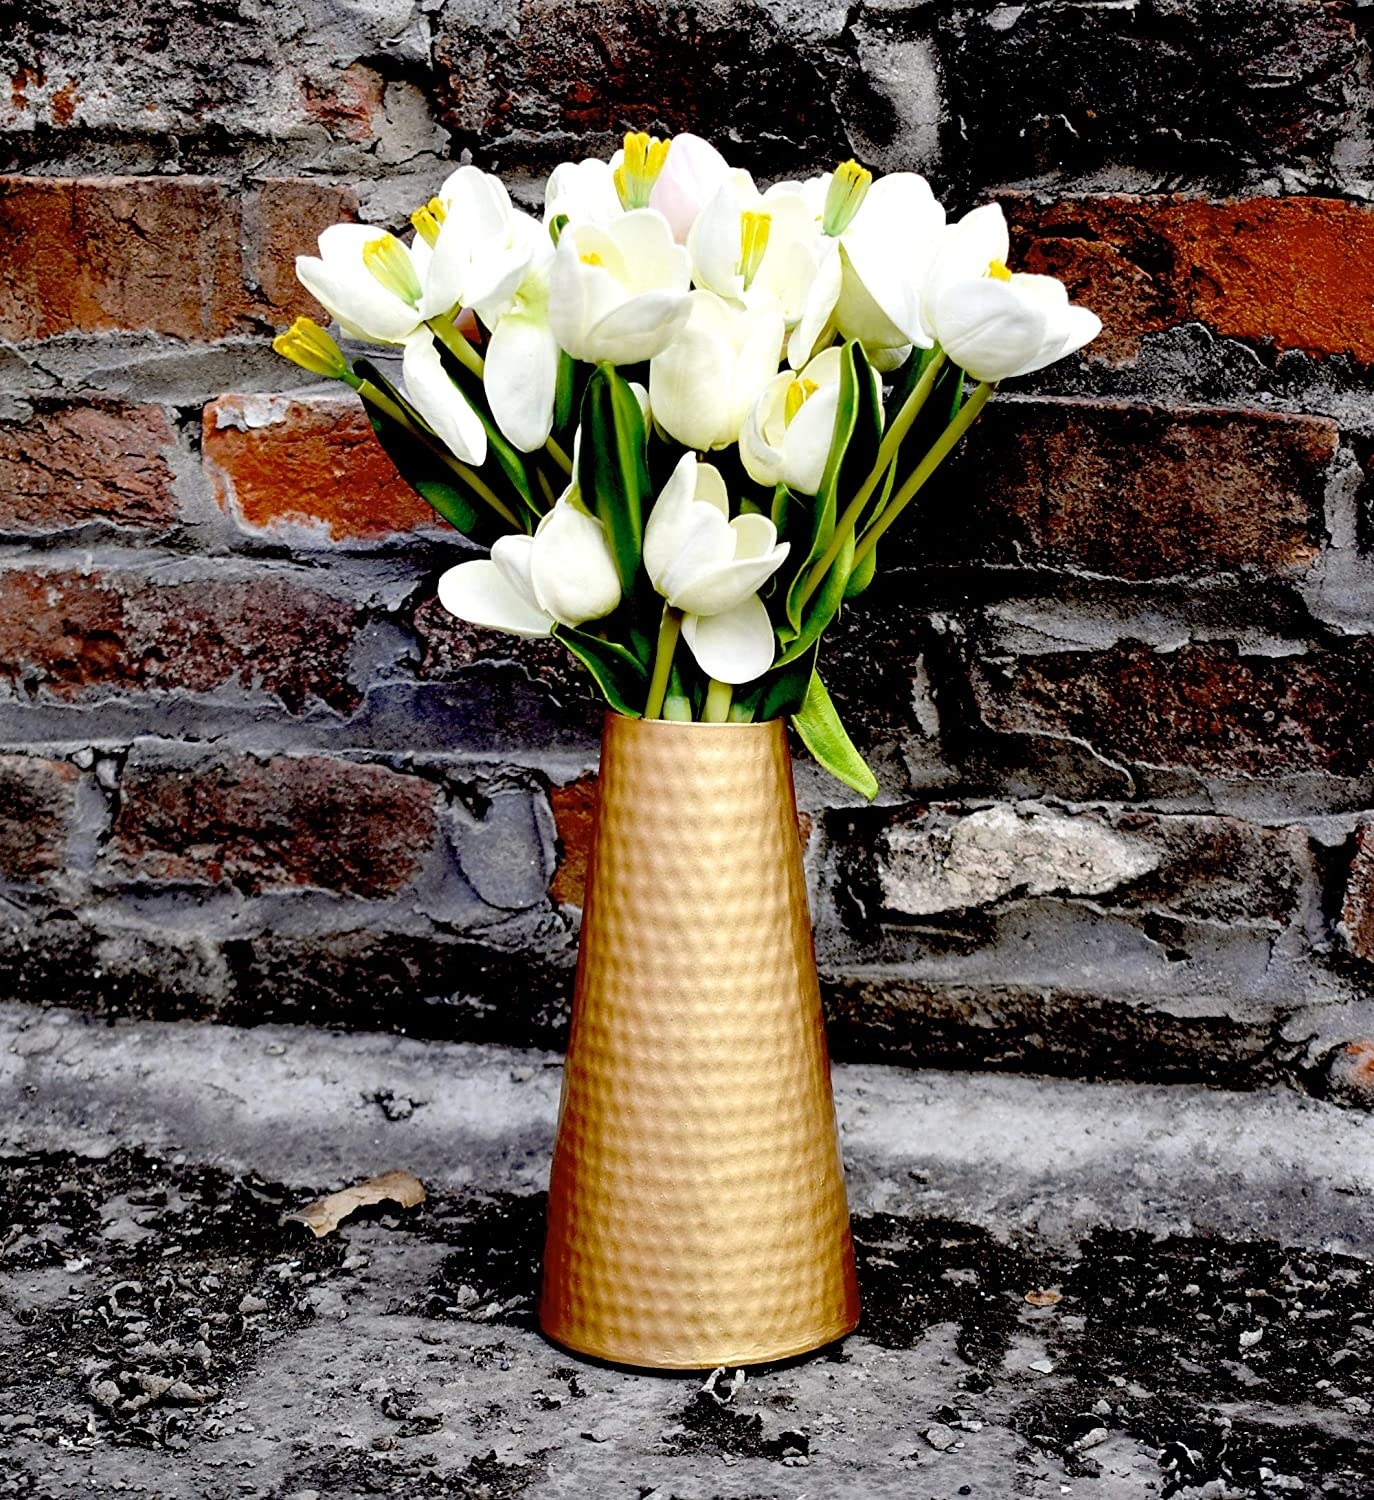 A metal vase in copper colour and white flowers placed in it